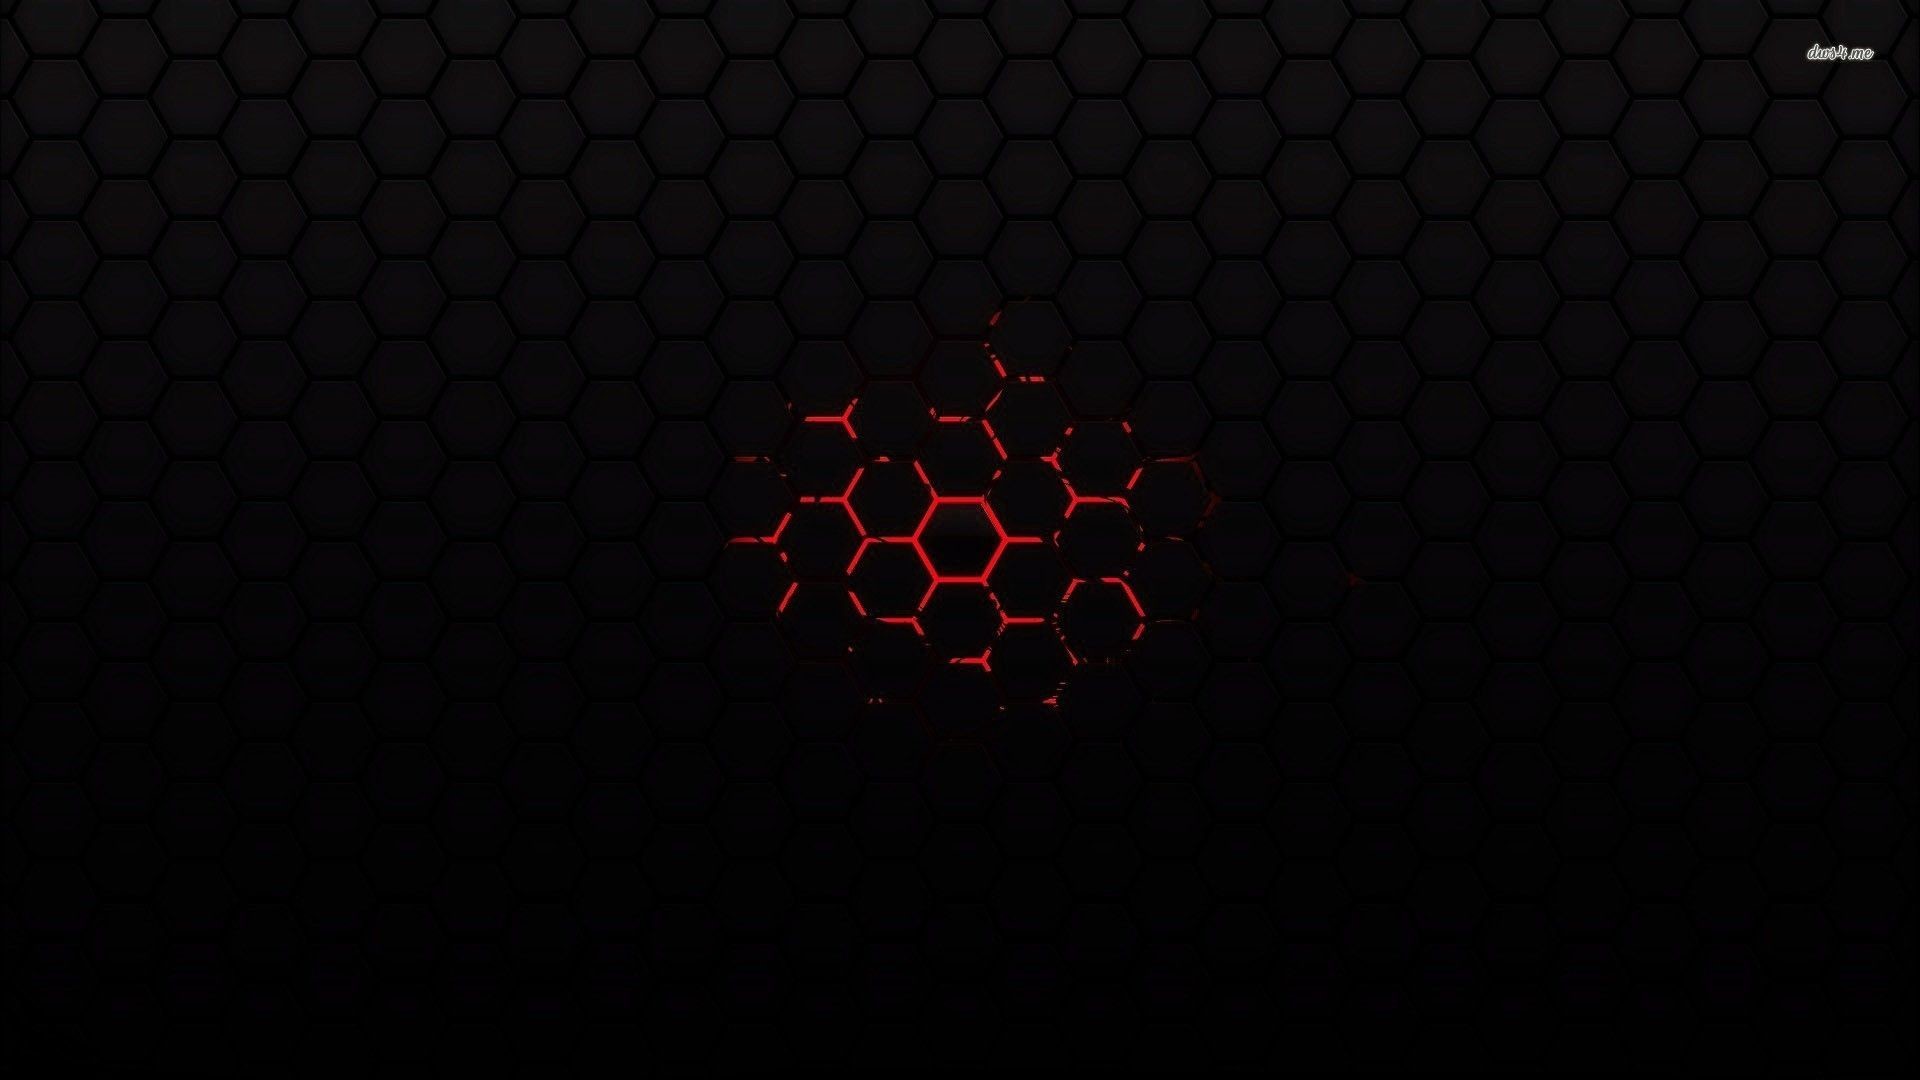 1920x1080 Red on black honeycomb pattern wallpaper - Abstract wallpapers .